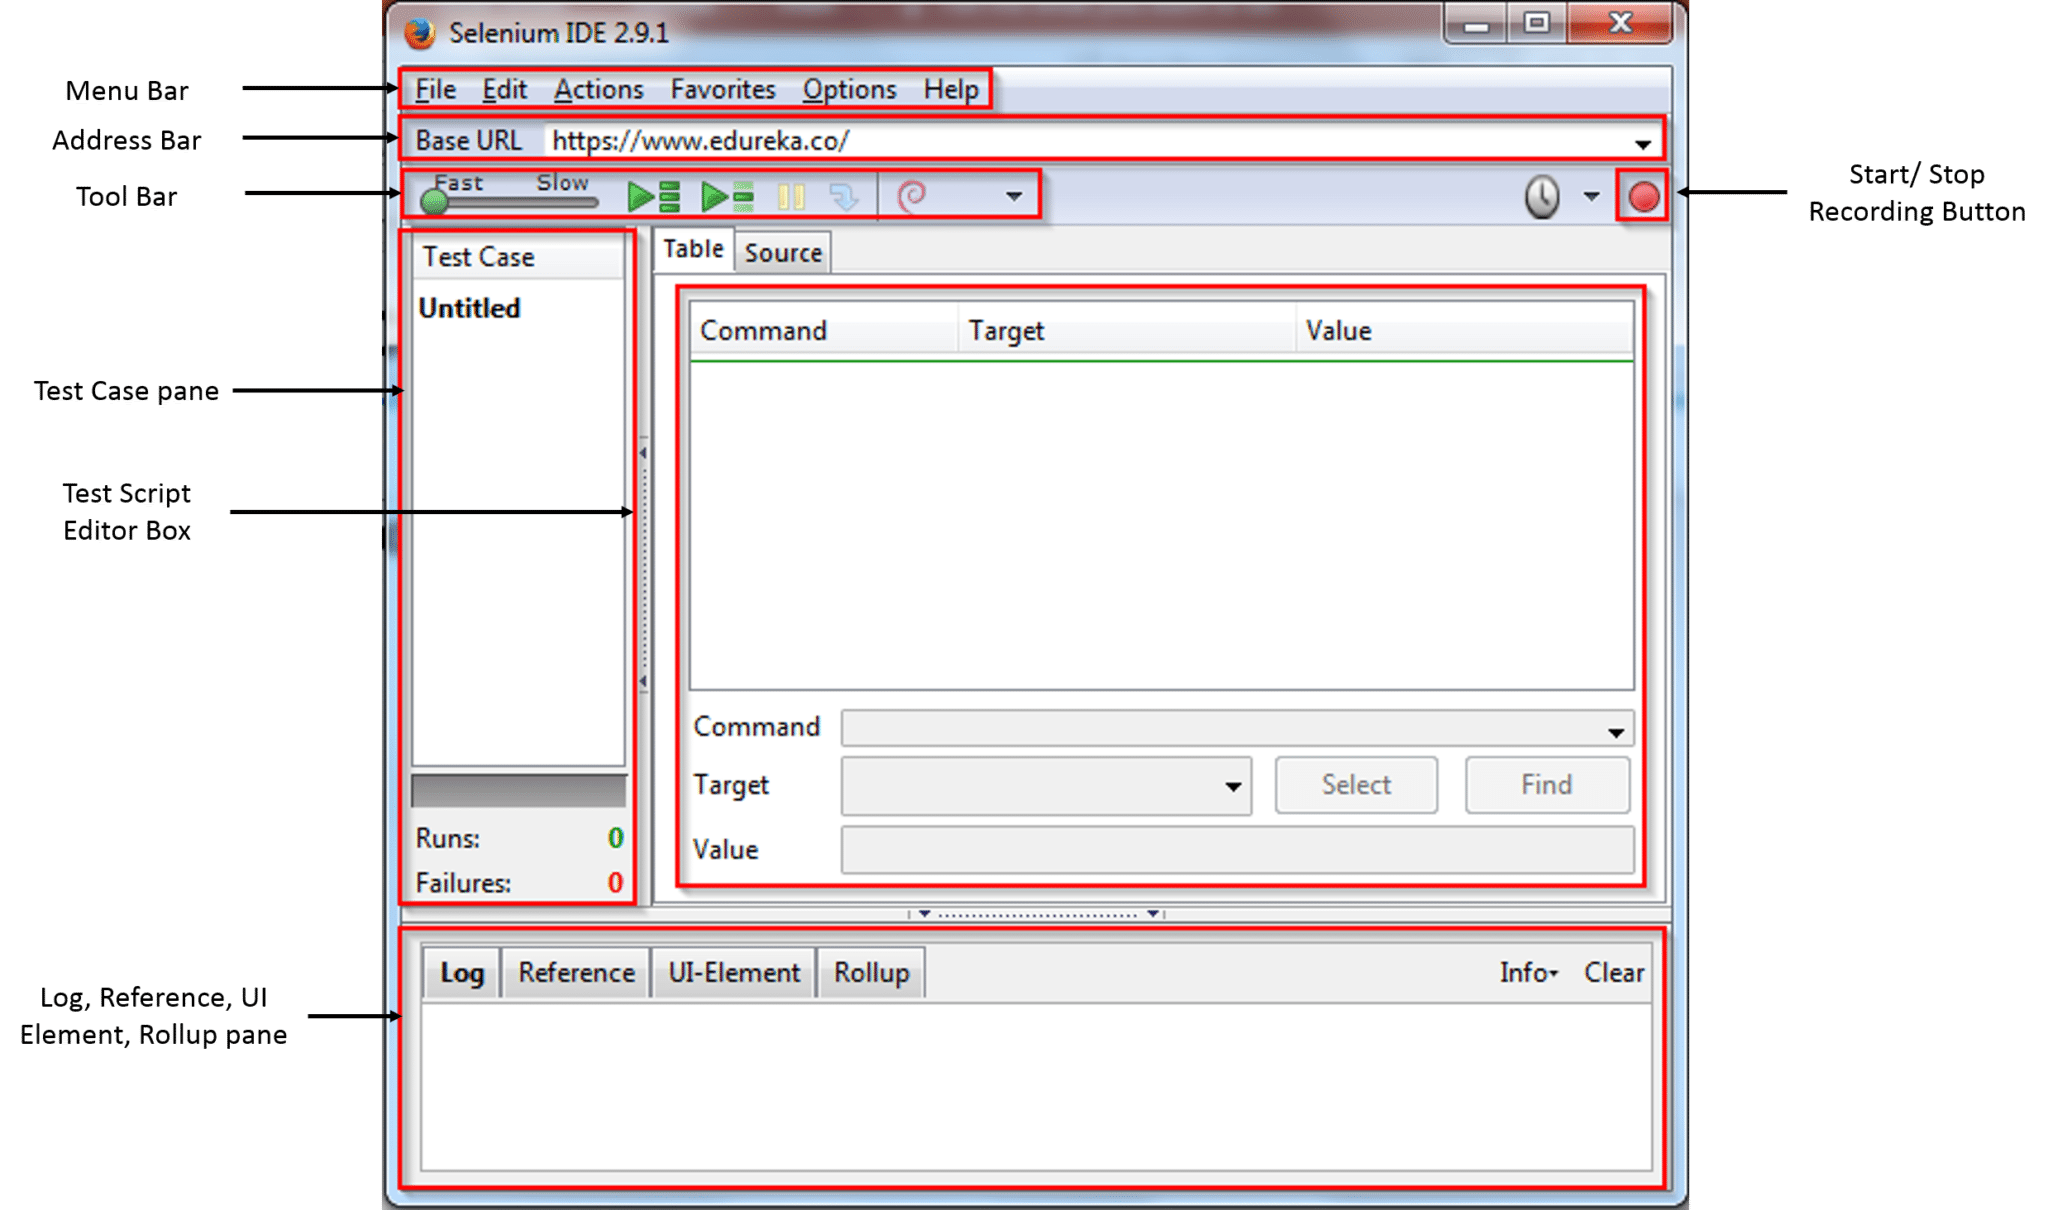 install selenium ide addon in chrome and excel